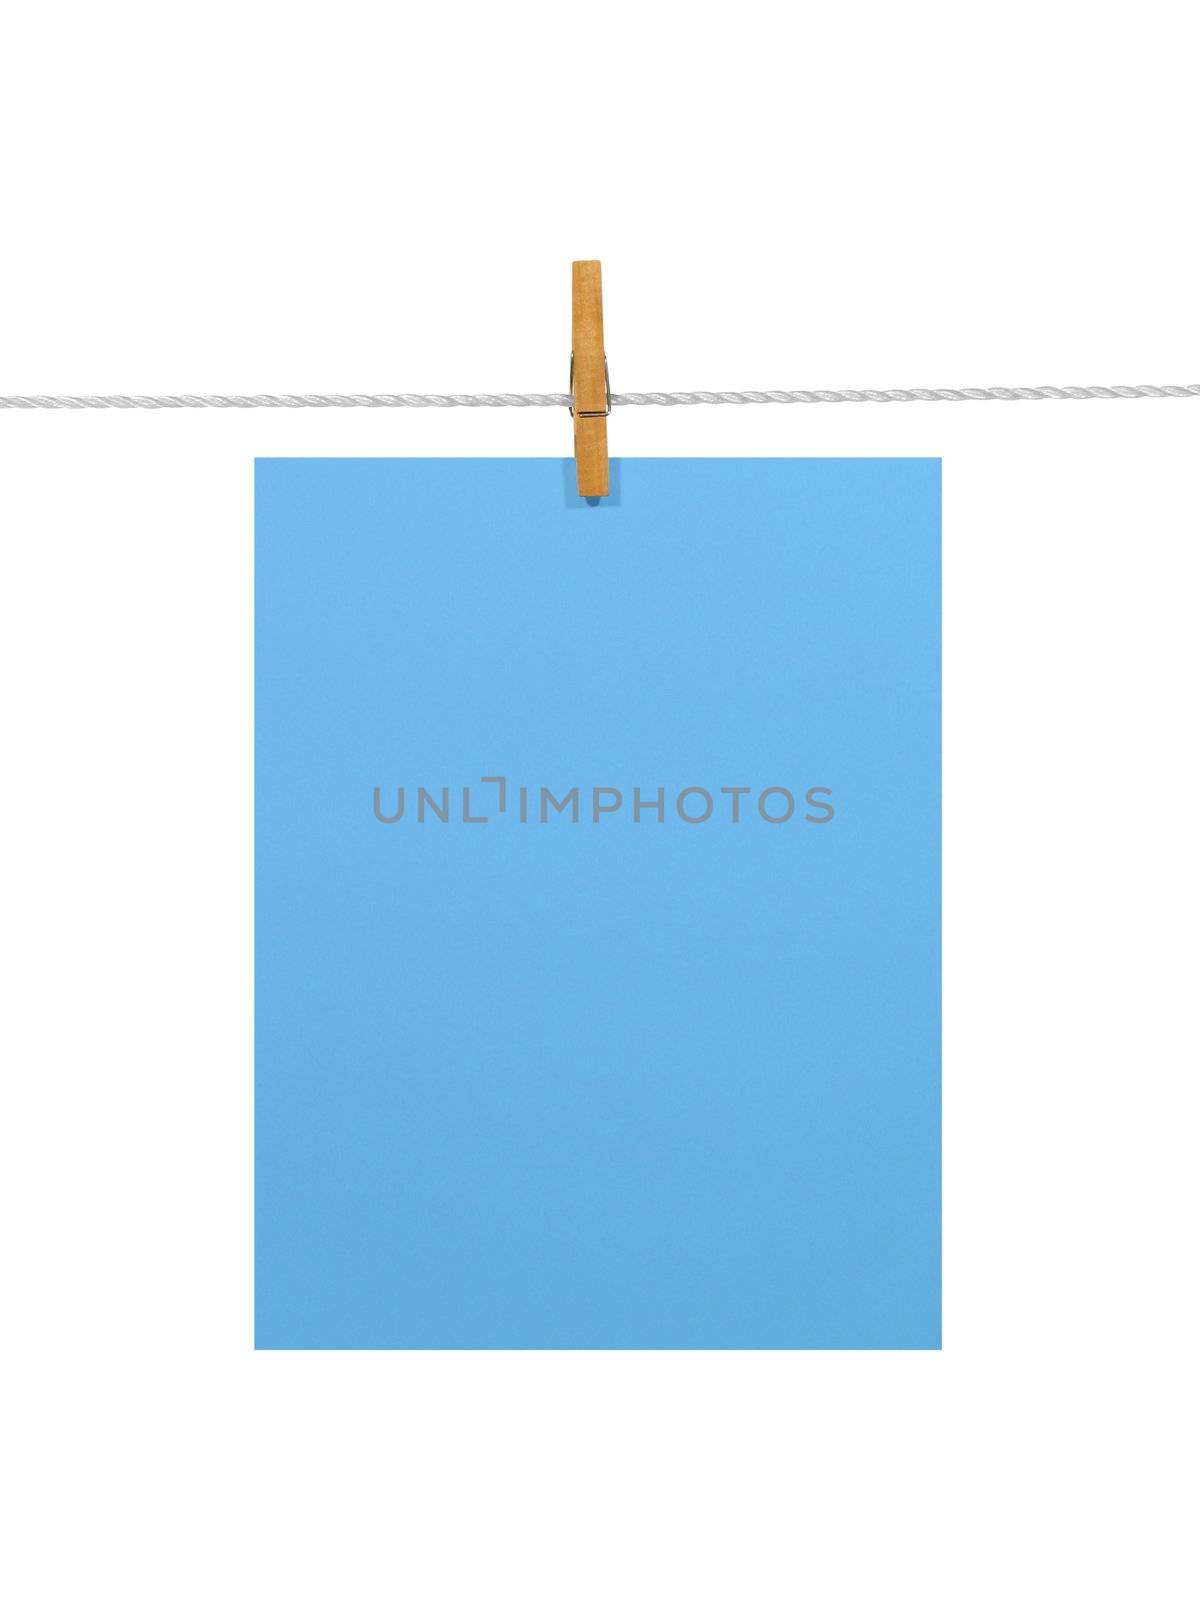 Sky-blue blank paper sheet on a clothes line. Isolated on white background. Contains two clipping paths: 1) paper, clothes line and clothespin; 2) paper only